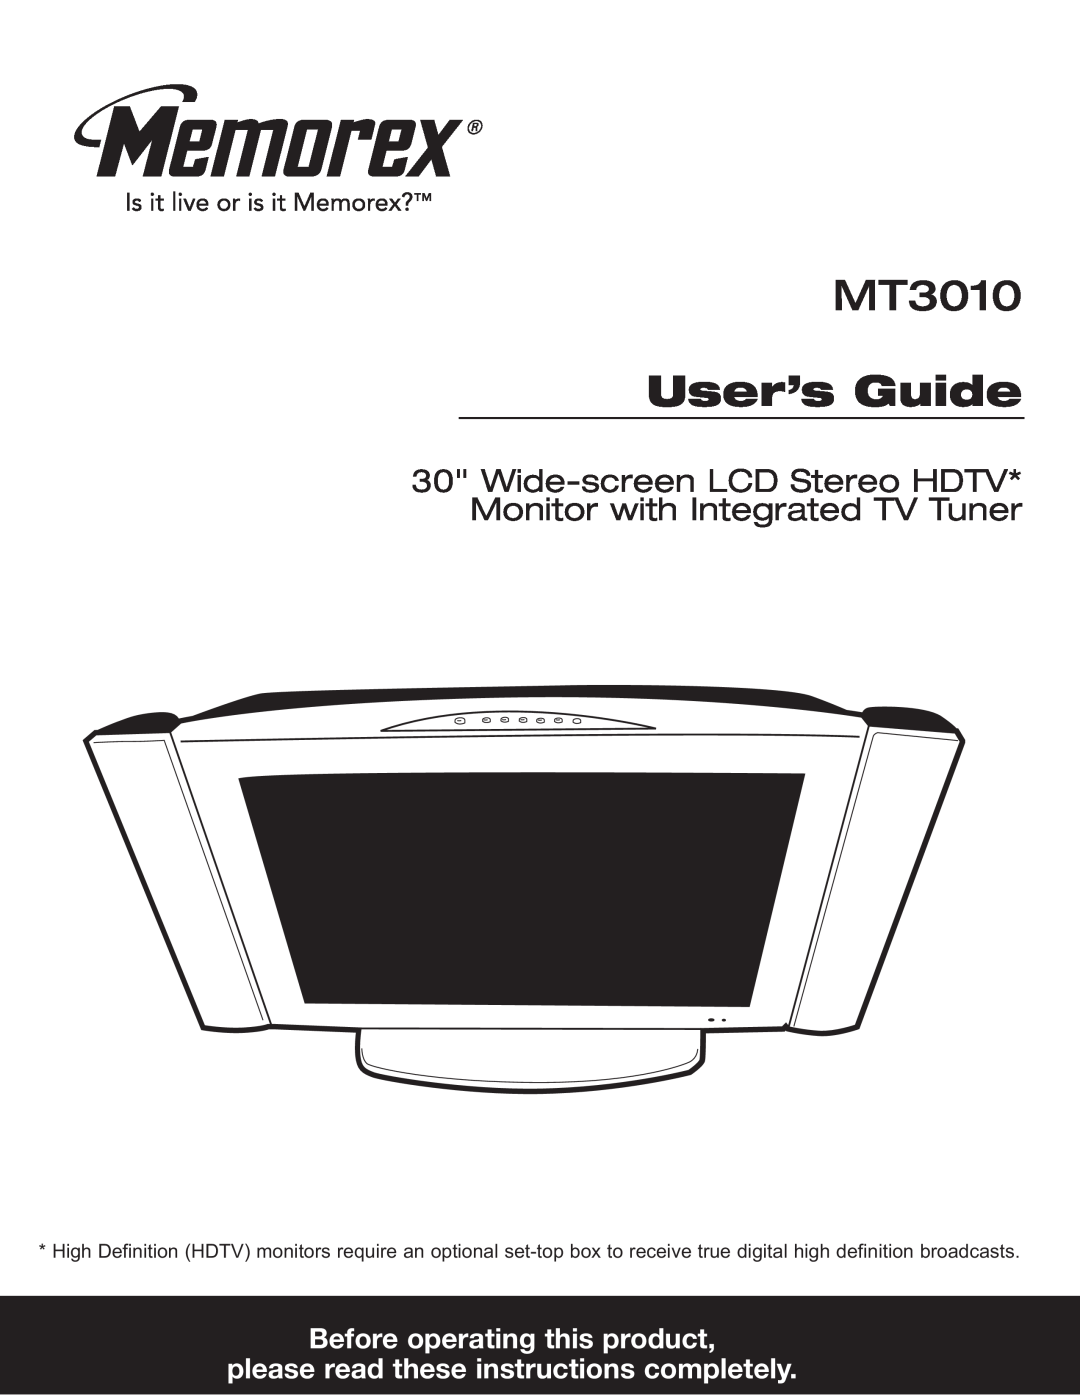 Memorex MT3010OM manual User’s Guide, Wide-screen LCD Stereo HDTV* Monitor with Integrated TV Tuner 